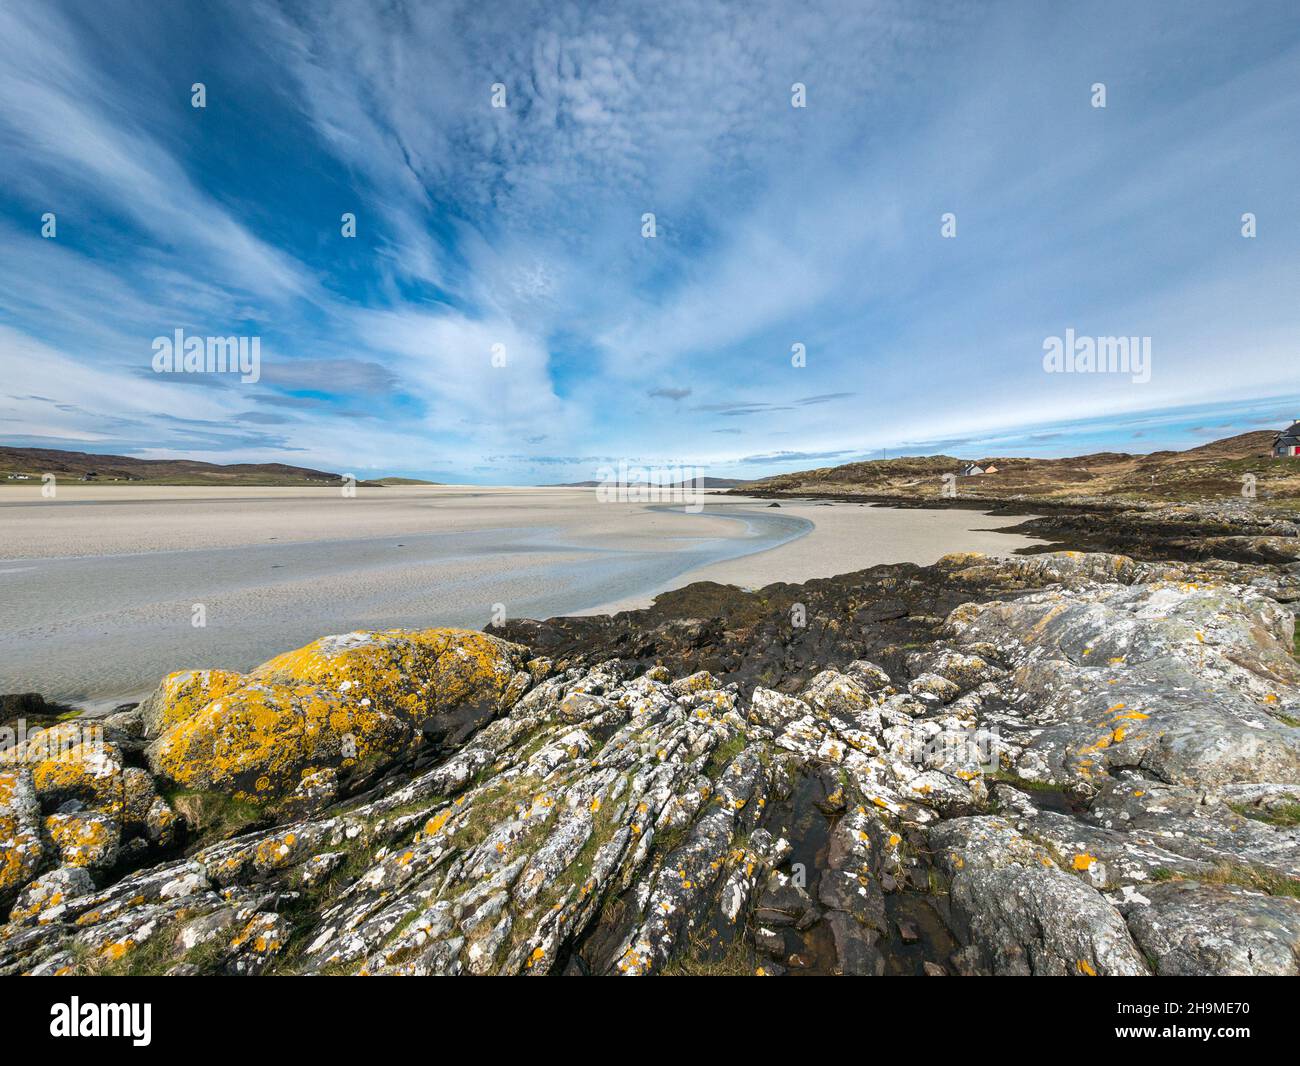 Dramatic blue sky over the beautiful Luskentyre beach (Traigh Losgaintir) on the remote Hebridean Isle of Harris in the Outer Hebrides, Scotland, UK Stock Photo